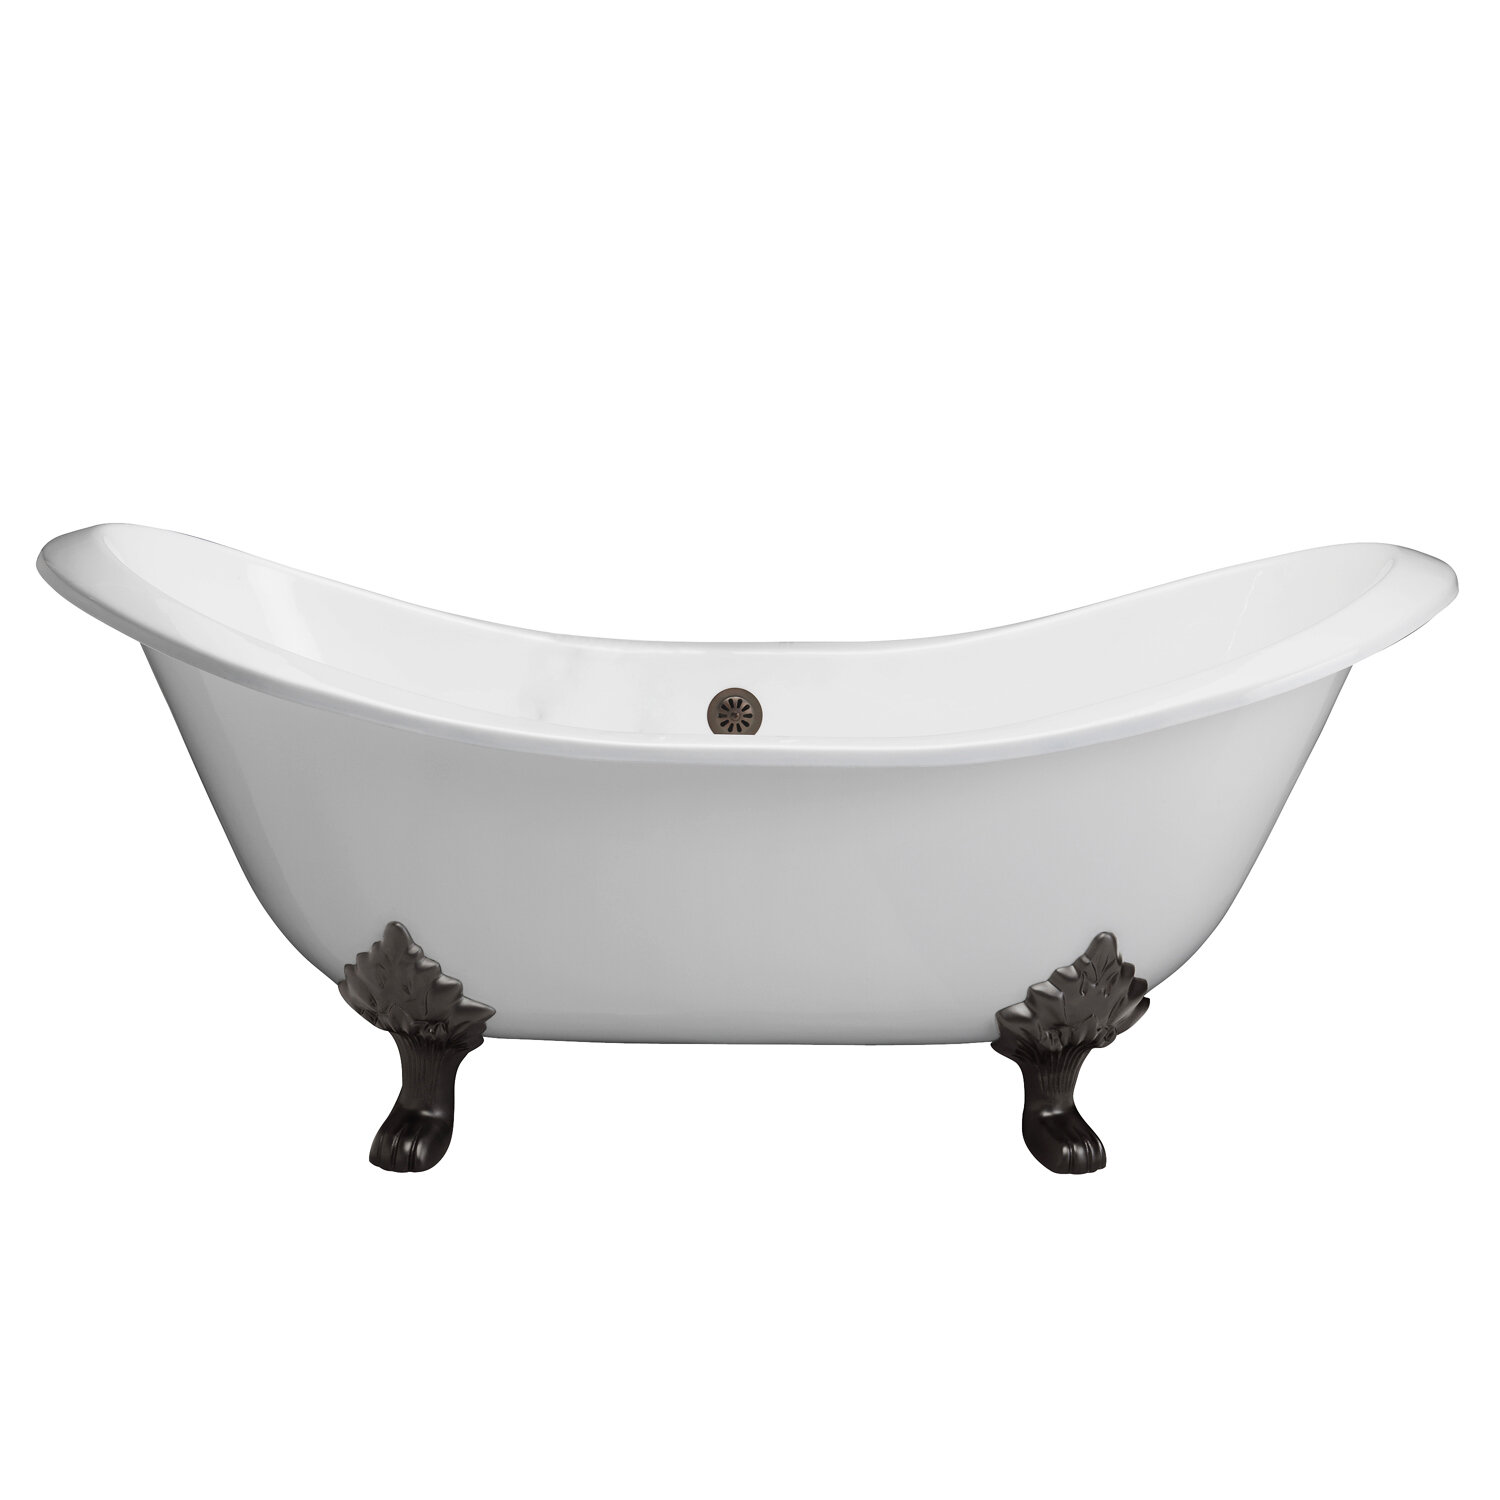 Wholesale Domestic Kensington 1710mm x 740mm Single Ended Freestanding  Slipper Roll Top Bath with Chrome Tiger Feet